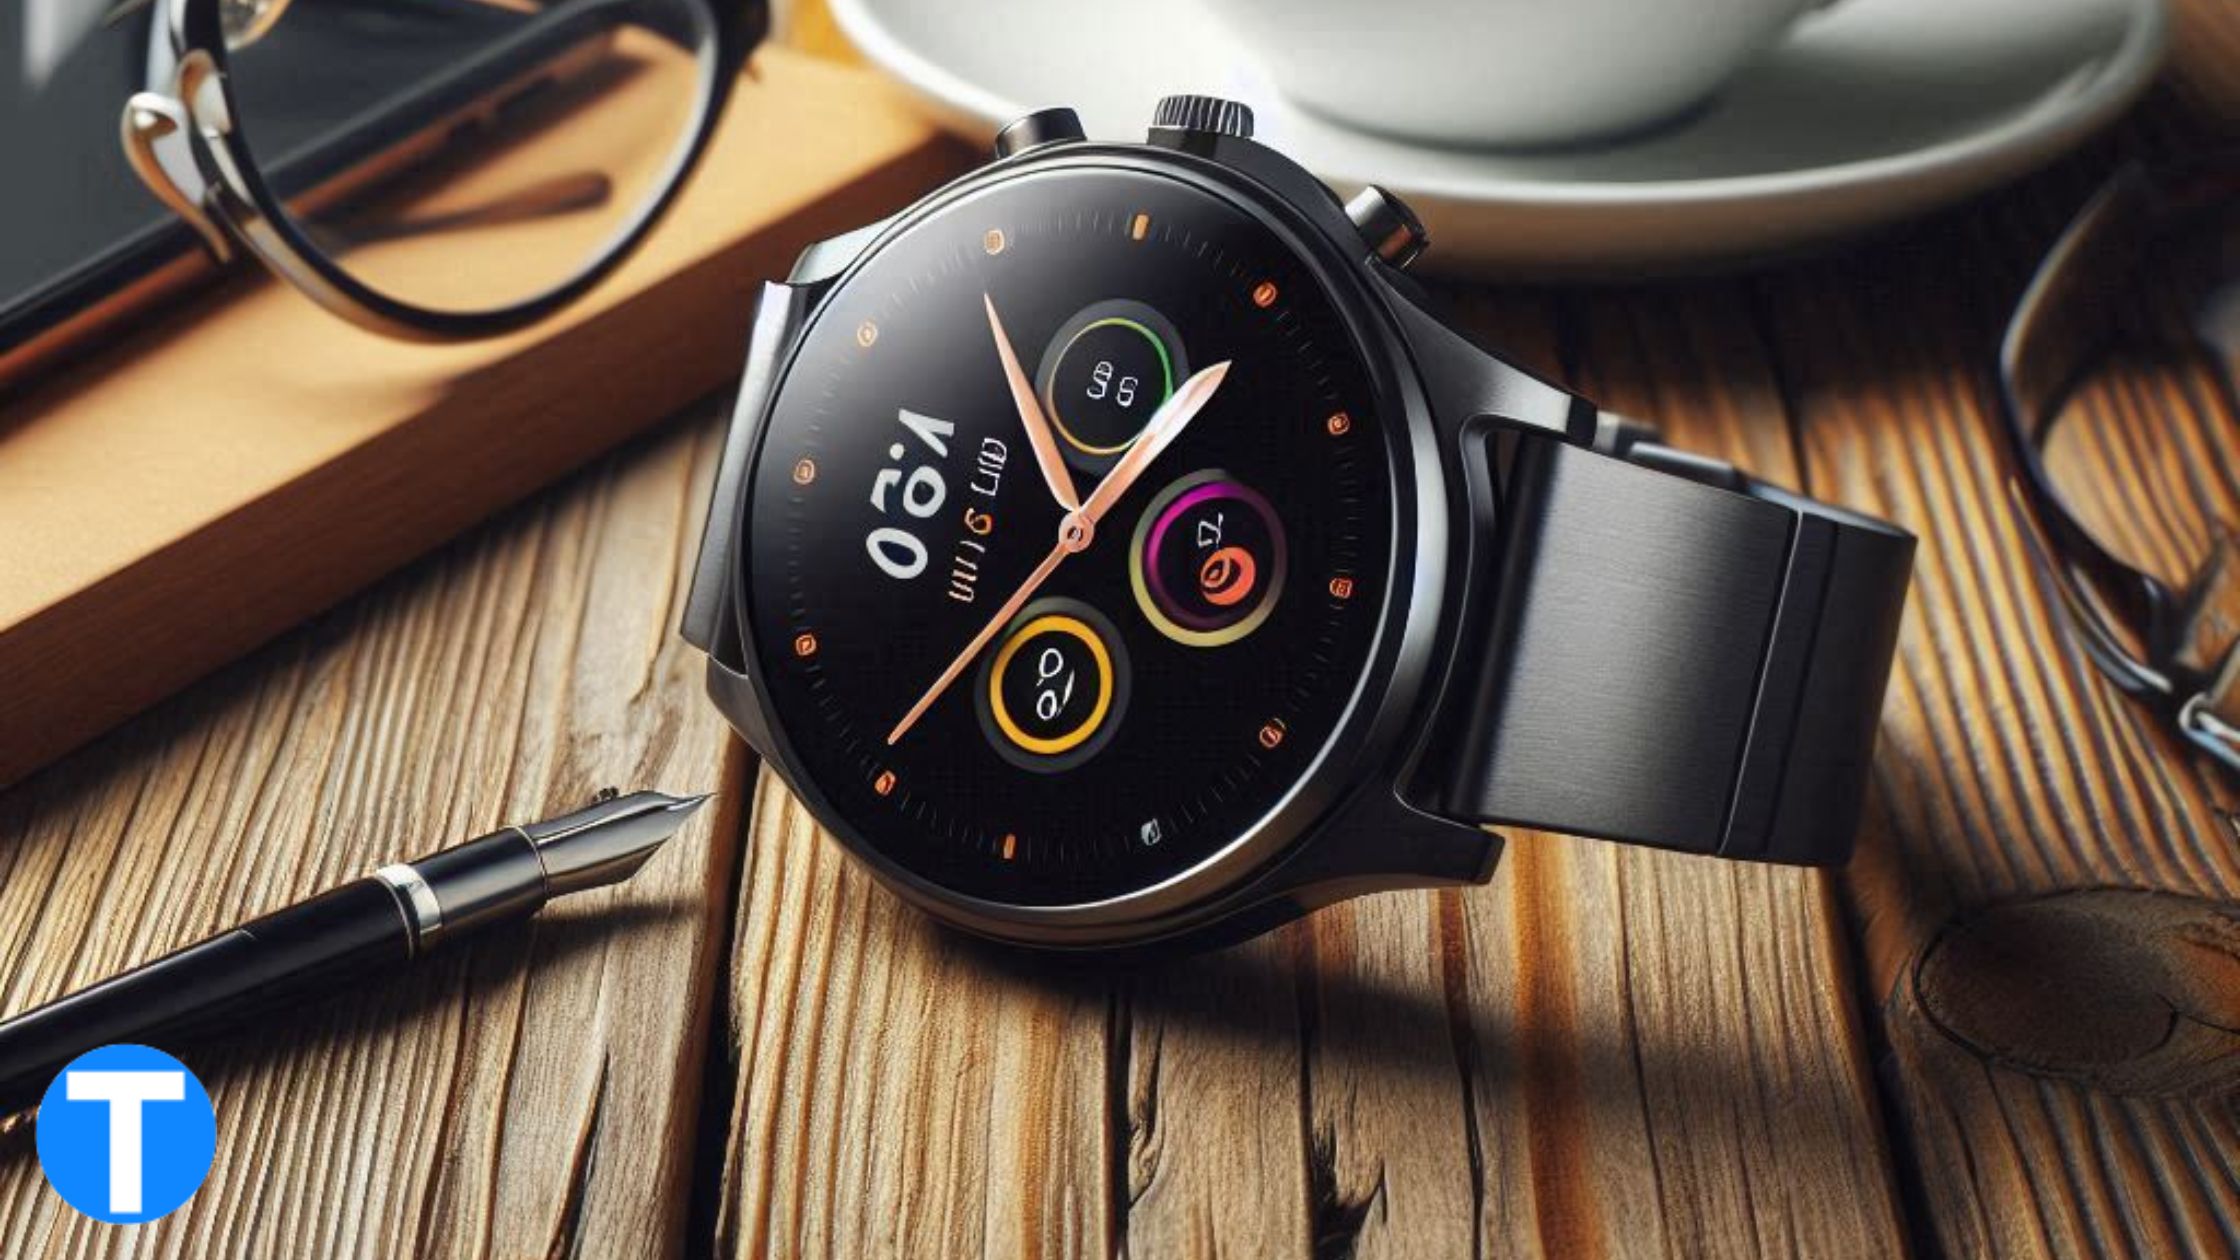 what is AMOLED display in a smartwatch